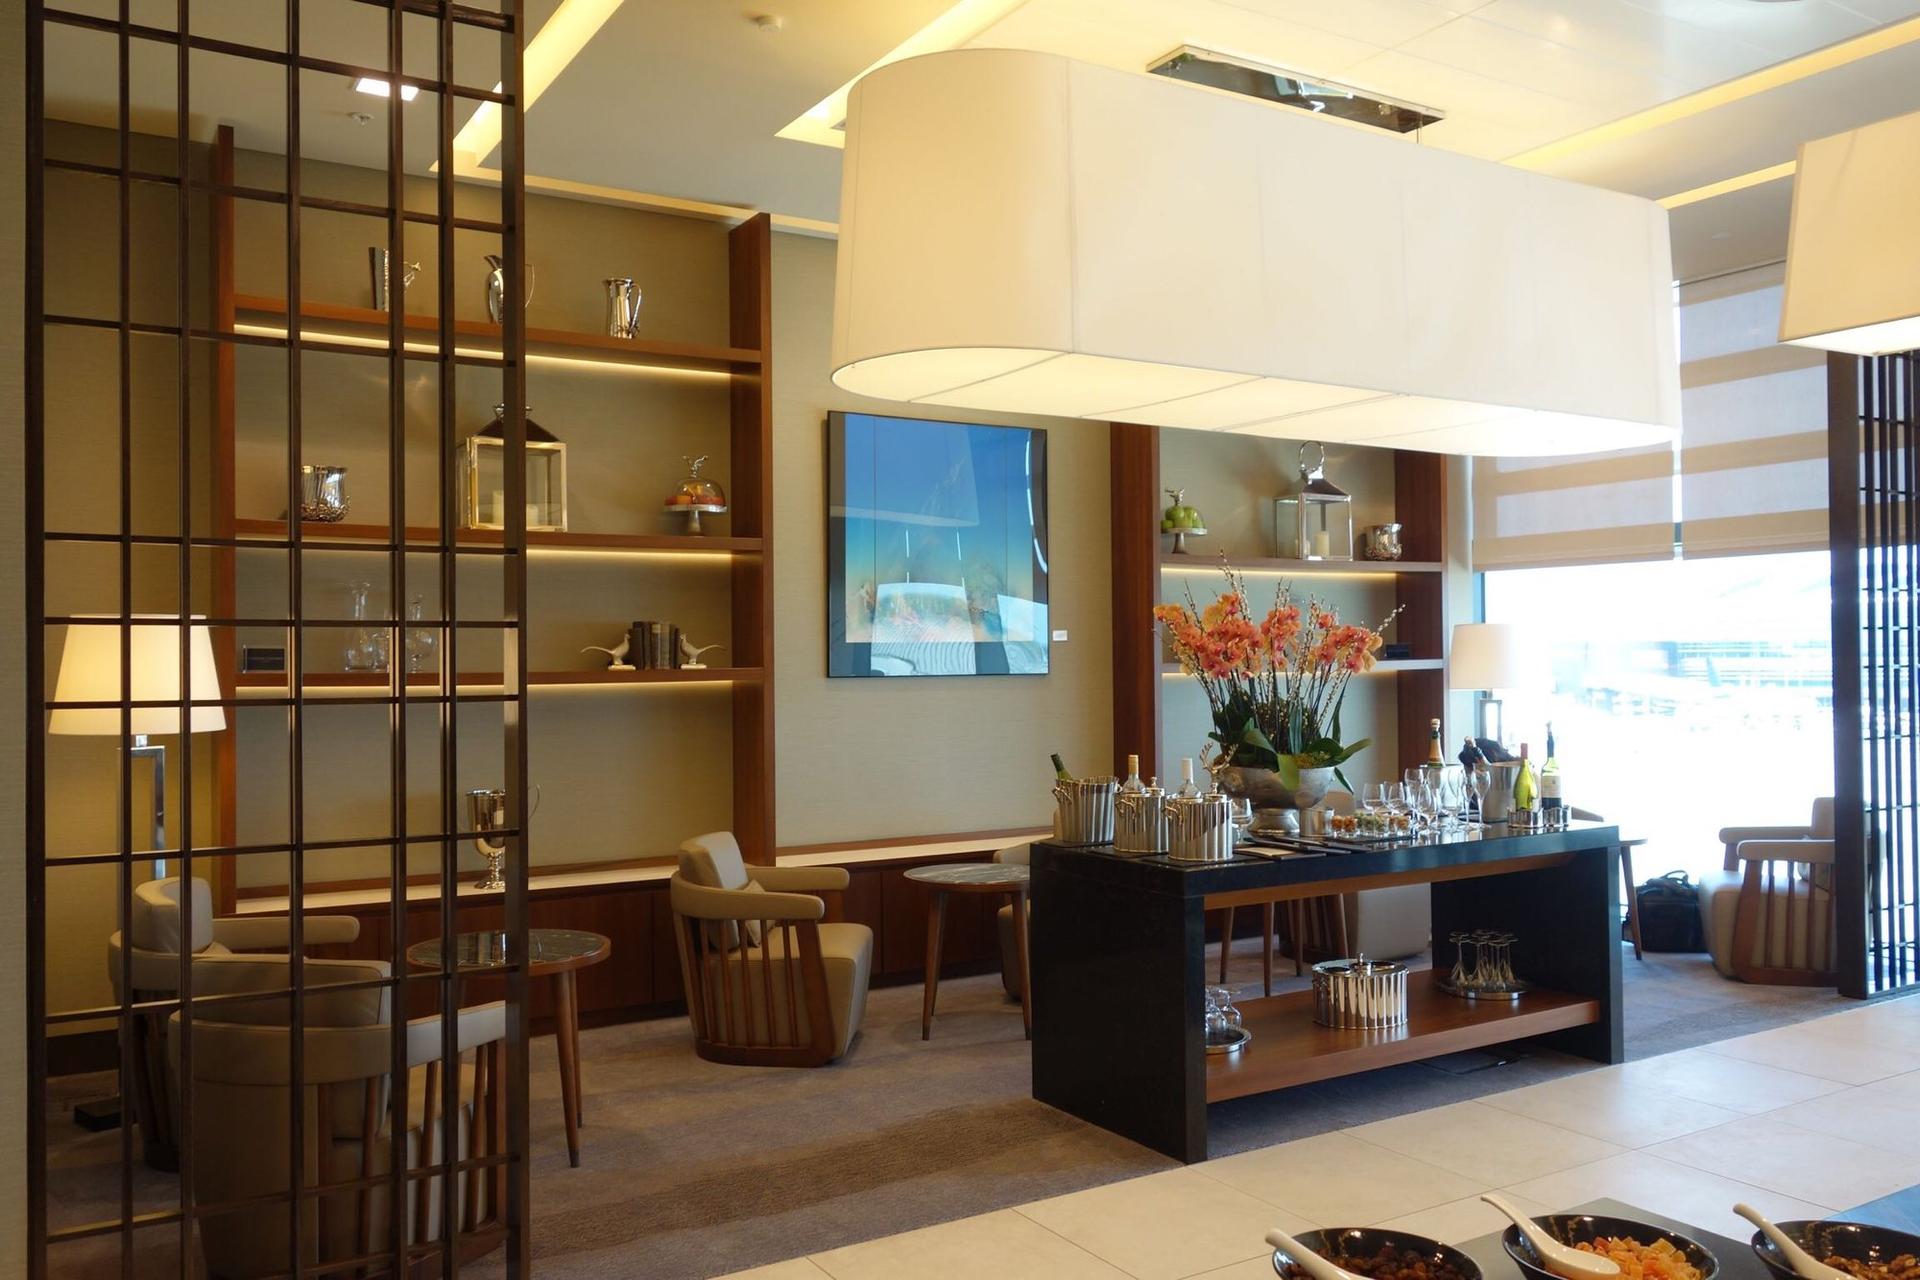 Singapore Airlines SilverKris Lounge image 8 of 36